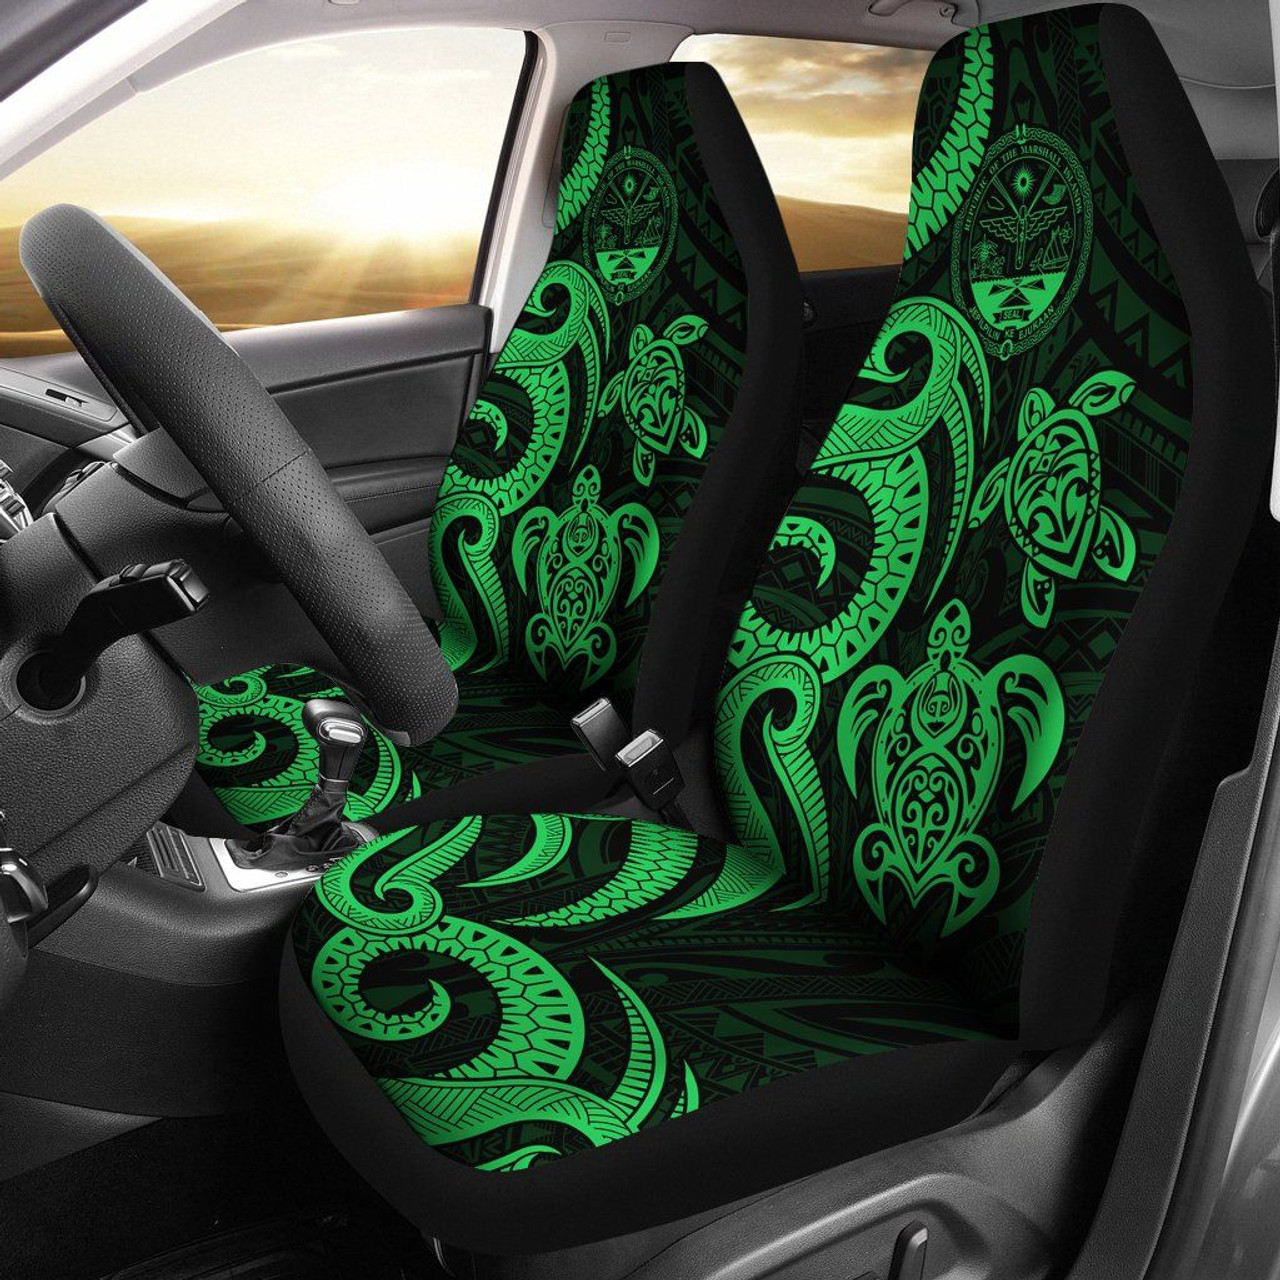 Marshall Islands Car Seat Covers - Green Tentacle Turtle Crest